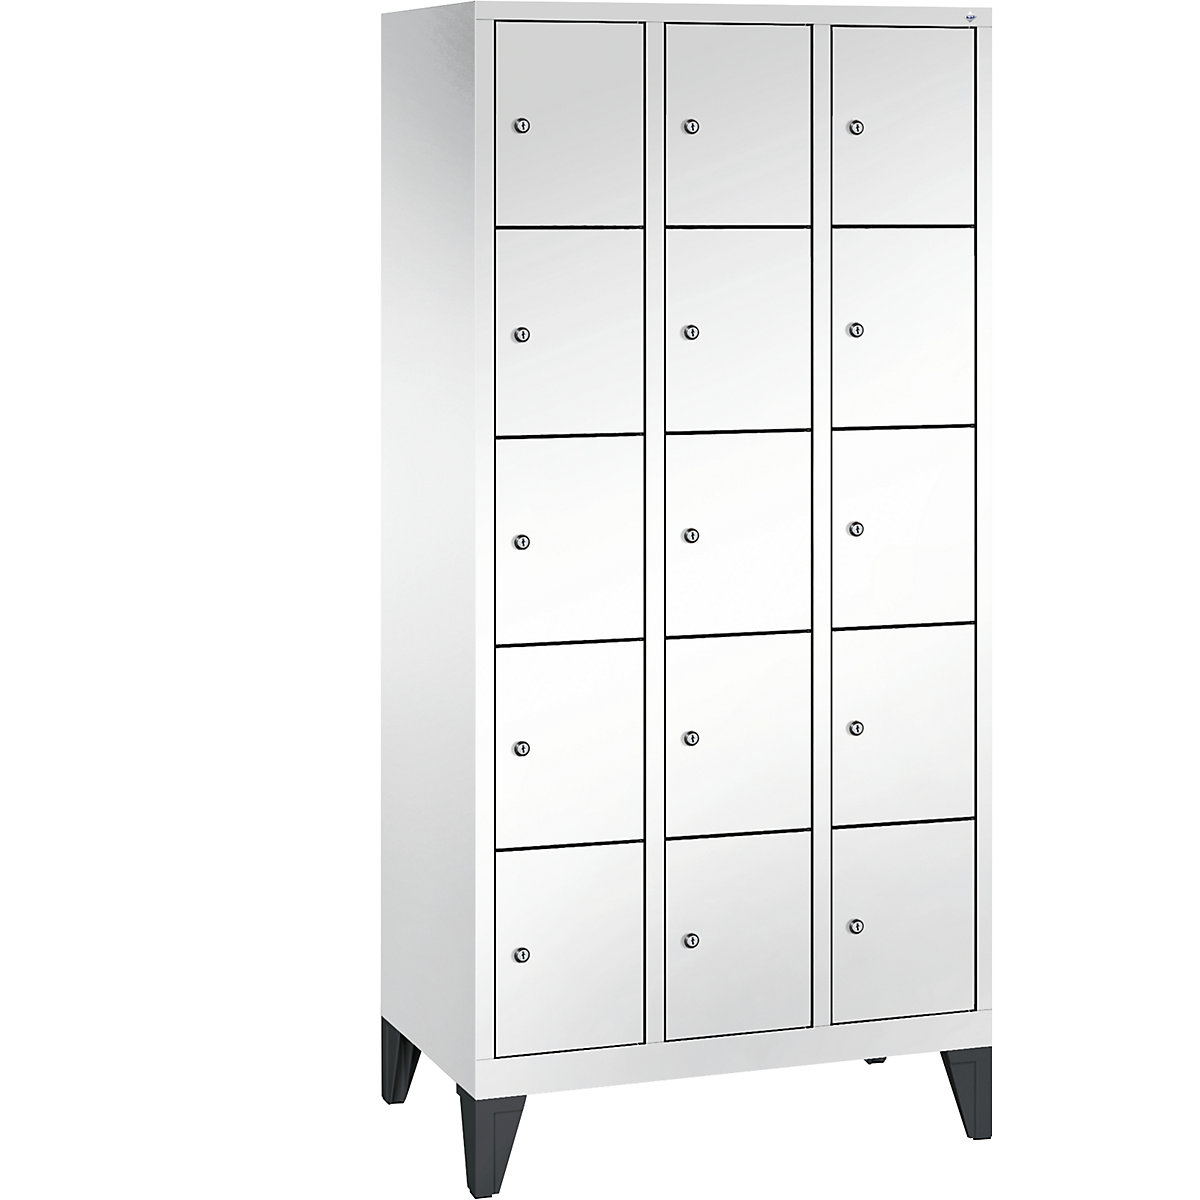 CLASSIC locker unit with feet – C+P, 3 compartments, 5 shelf compartments each, compartment width 300 mm, traffic white-7